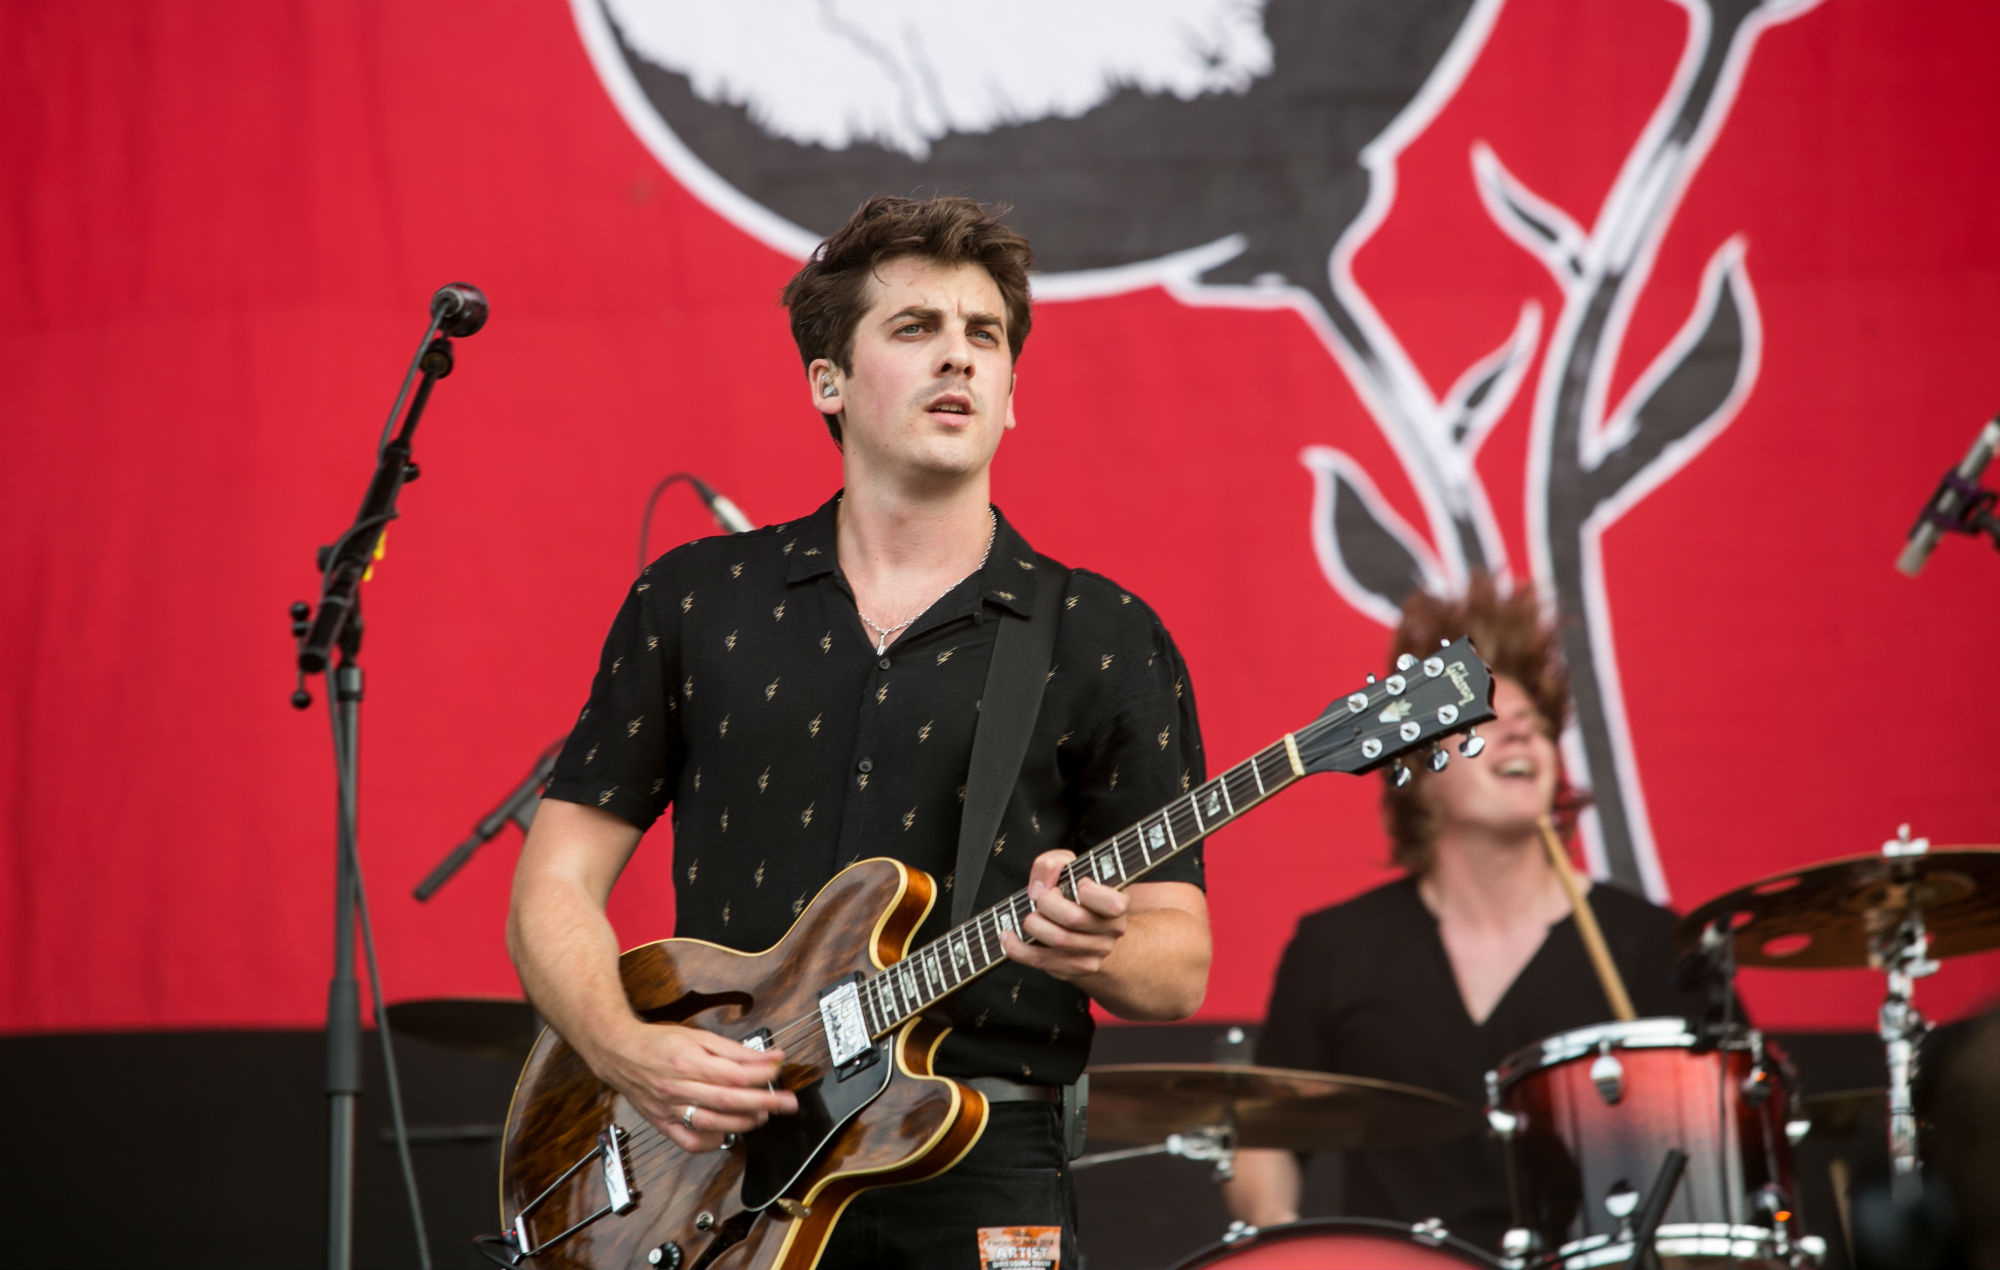 Circa Waves announce new run of intimate tour dates in November 2000x1270